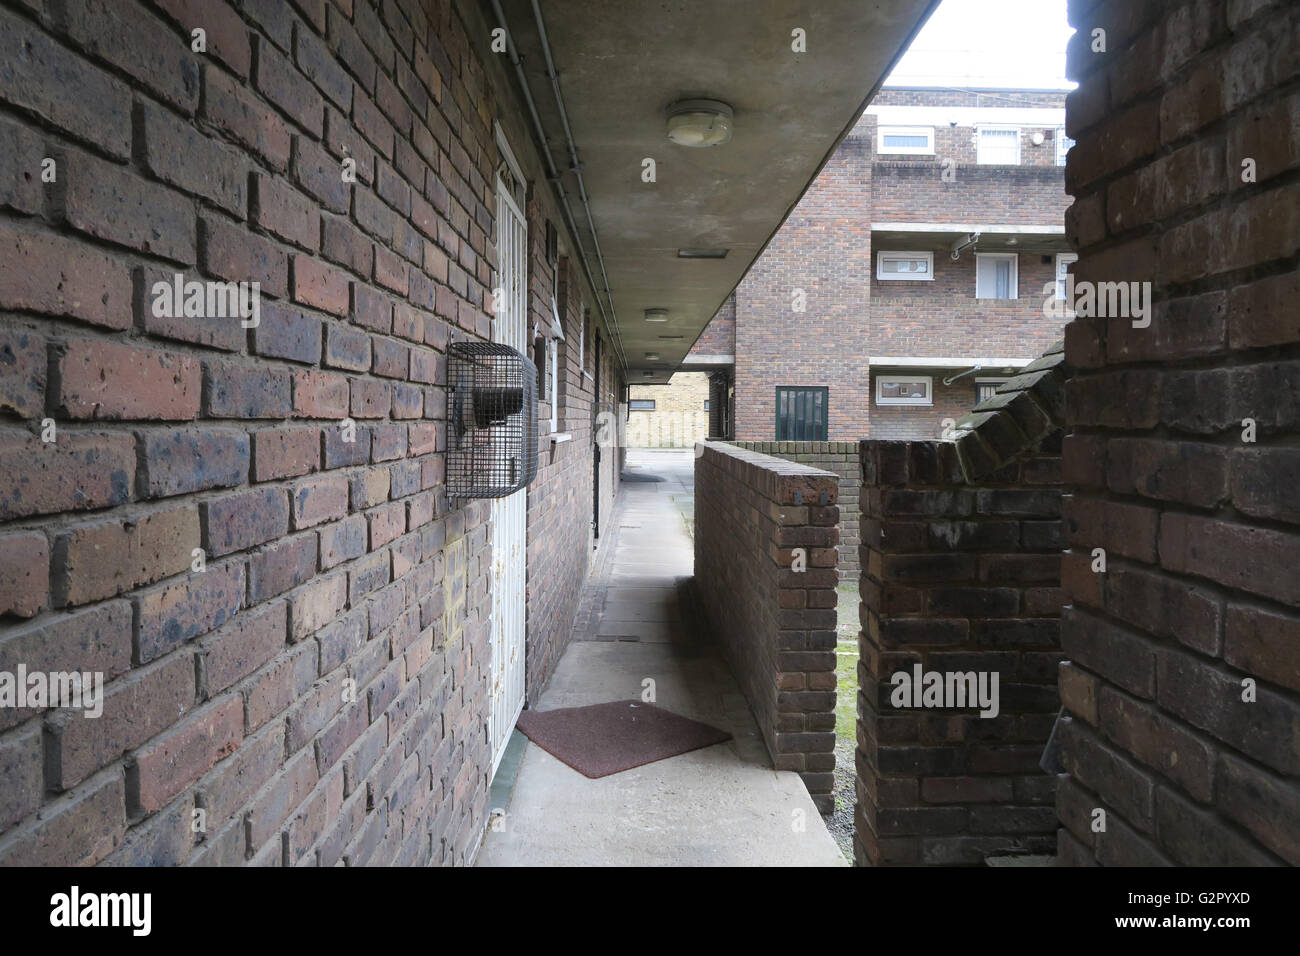 Side alley of a housing/council estate, stairwell, balconies. Stock Photo